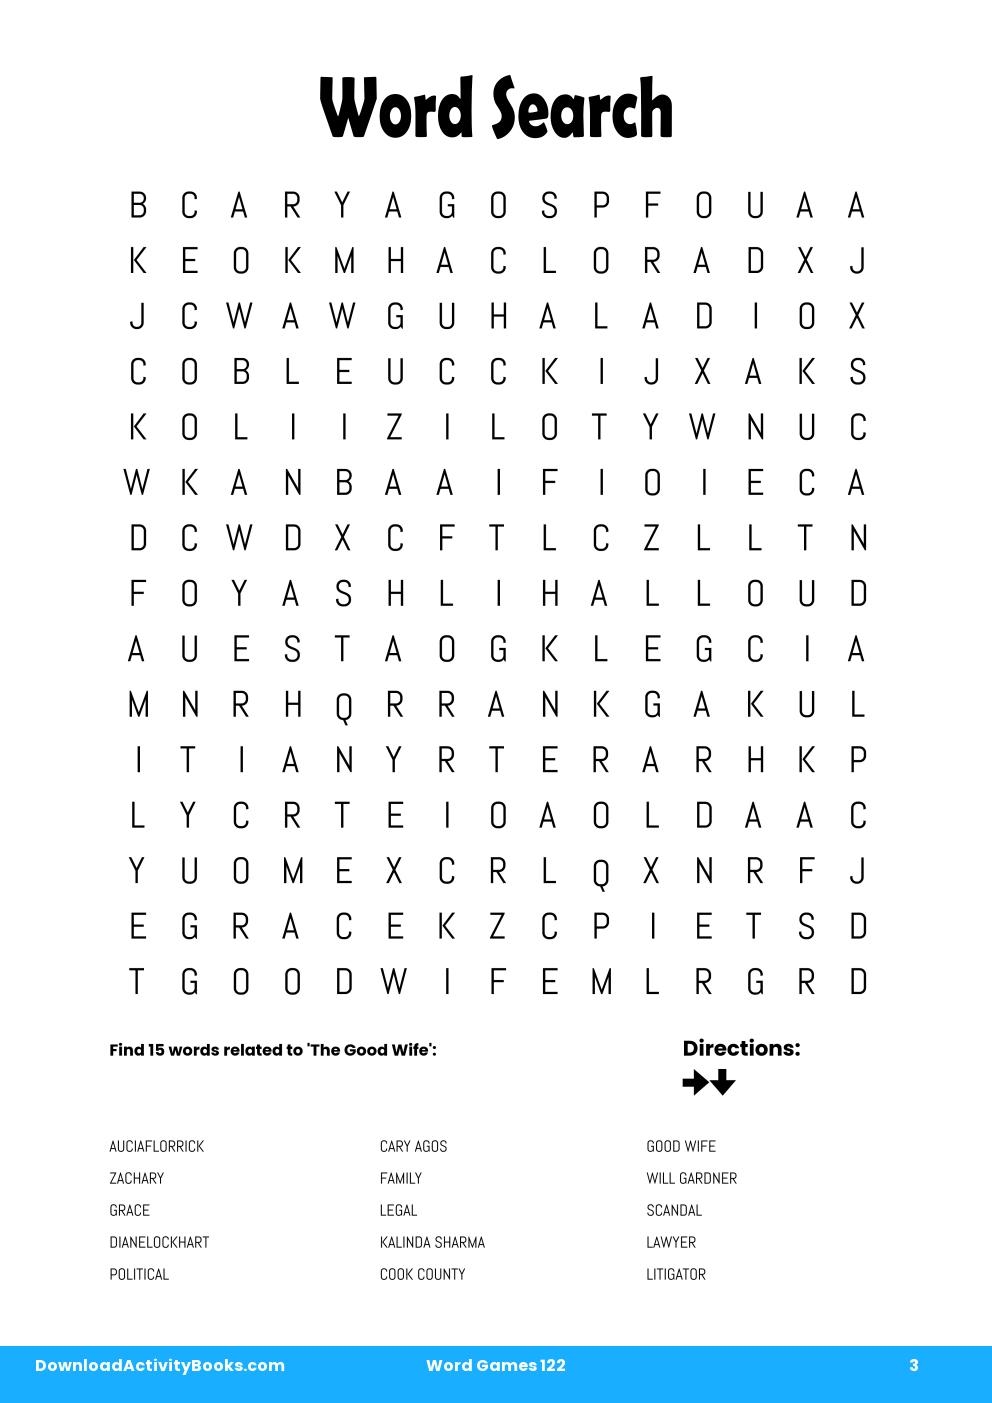 Word Search in Word Games 122